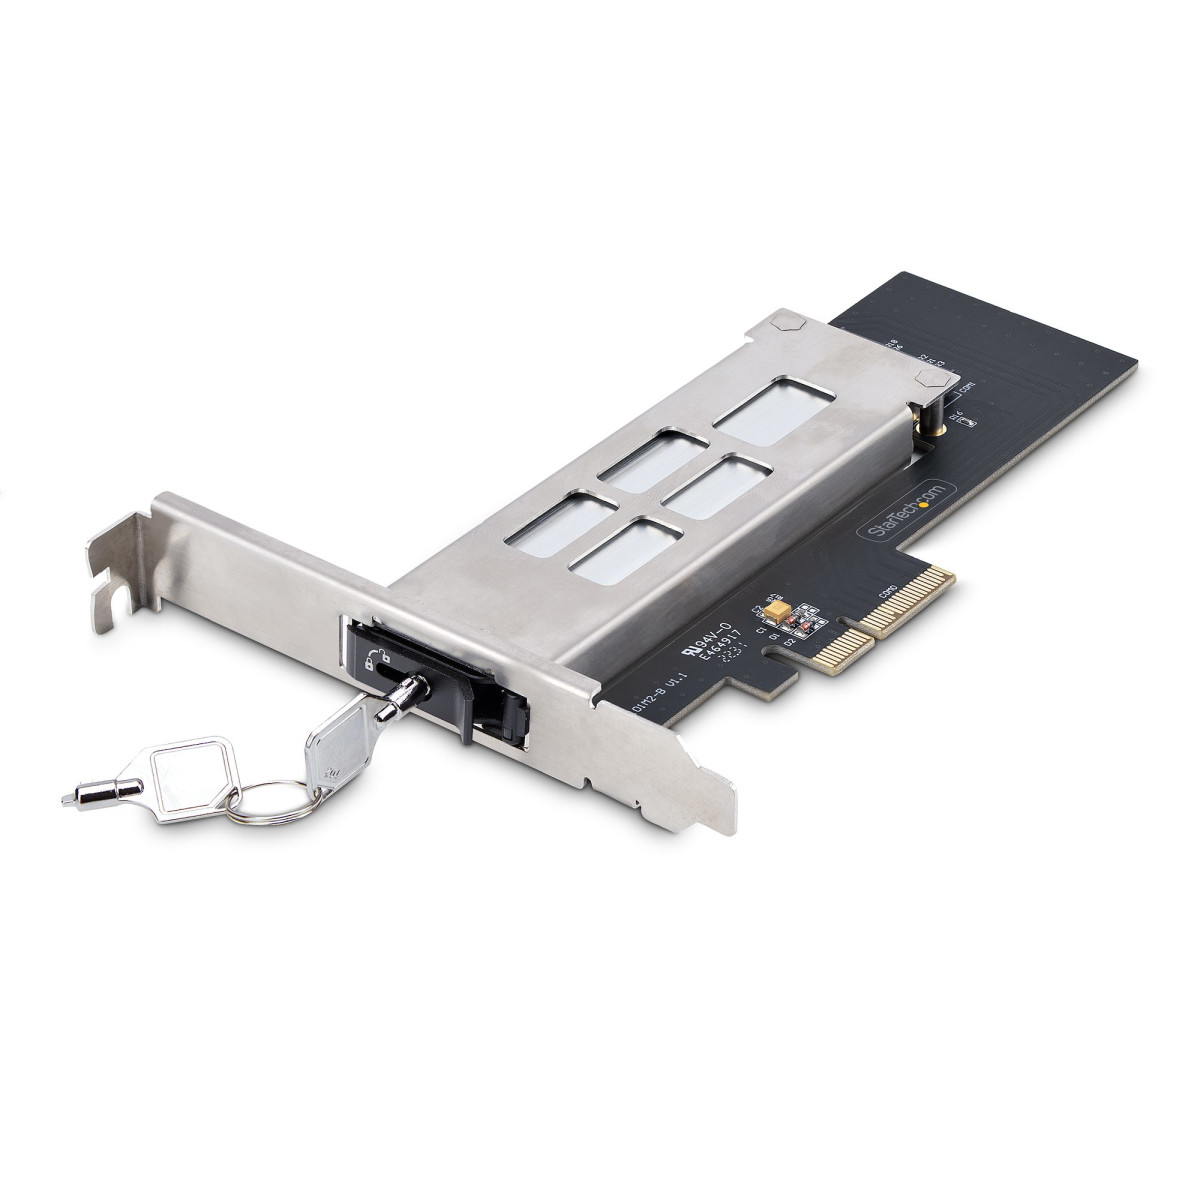 M.2 NVMe SSD to PCIe x4 Expansion Slot